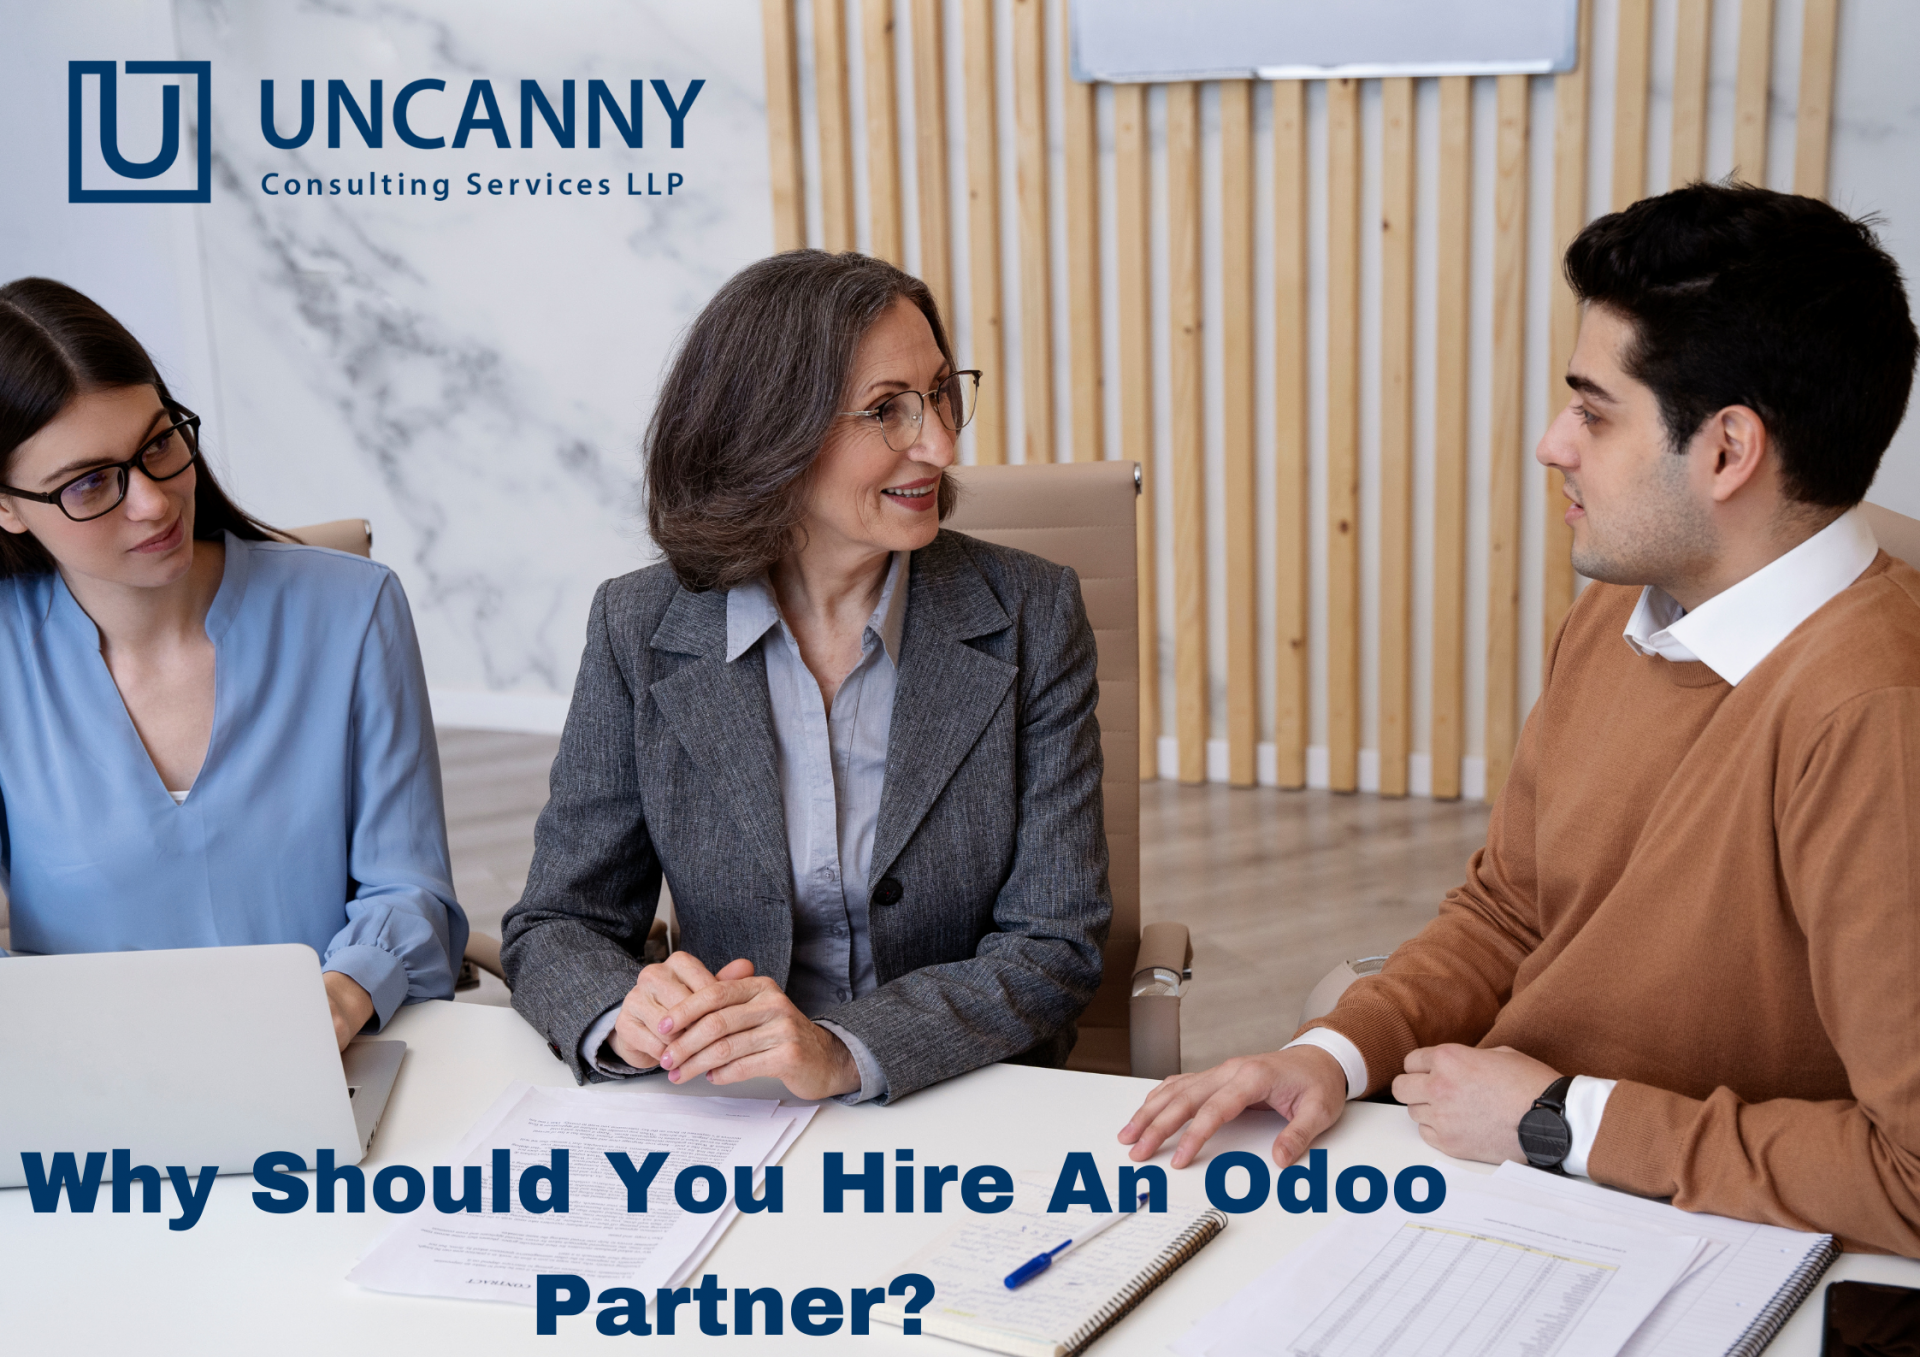 Why Should You Hire An Odoo Partner